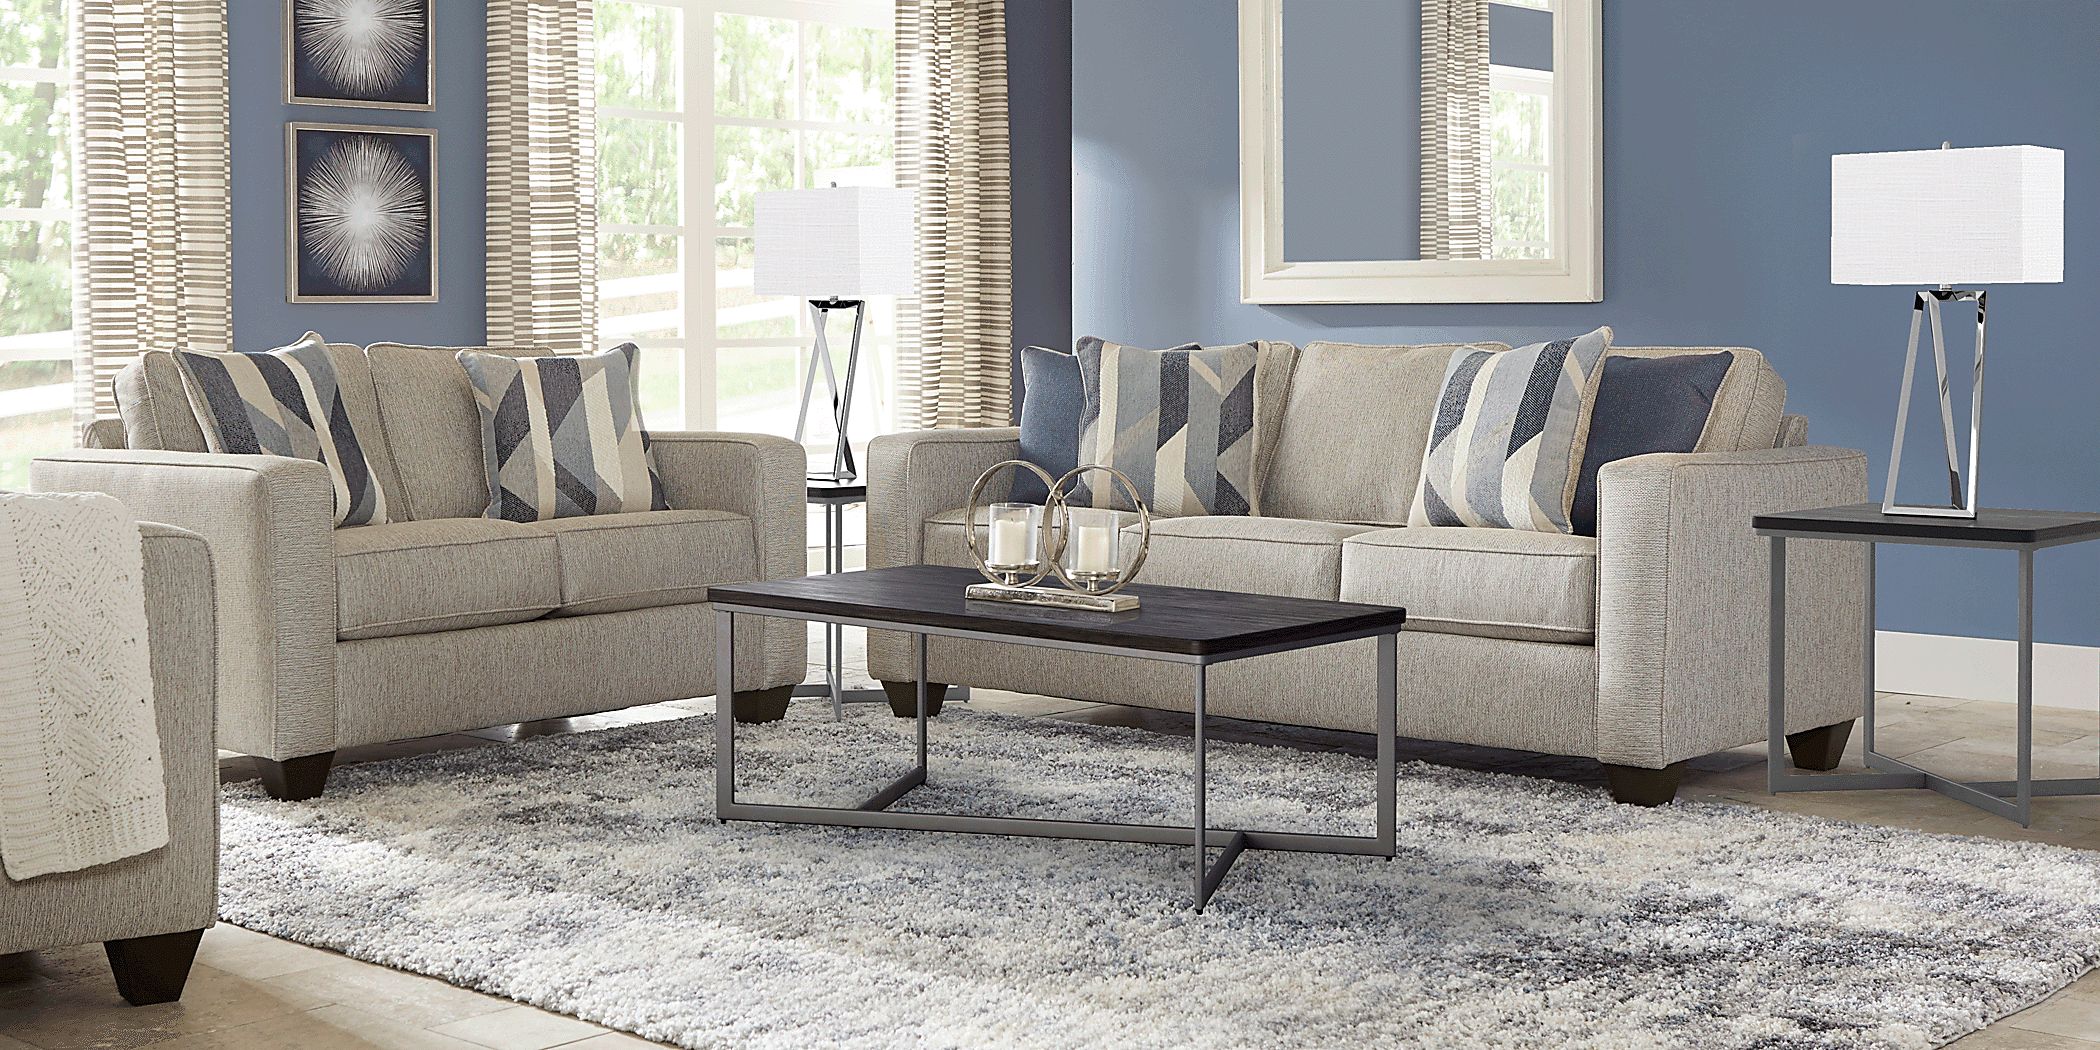 7 Ways to Spruce up Your Living Room with a Grey Sofa